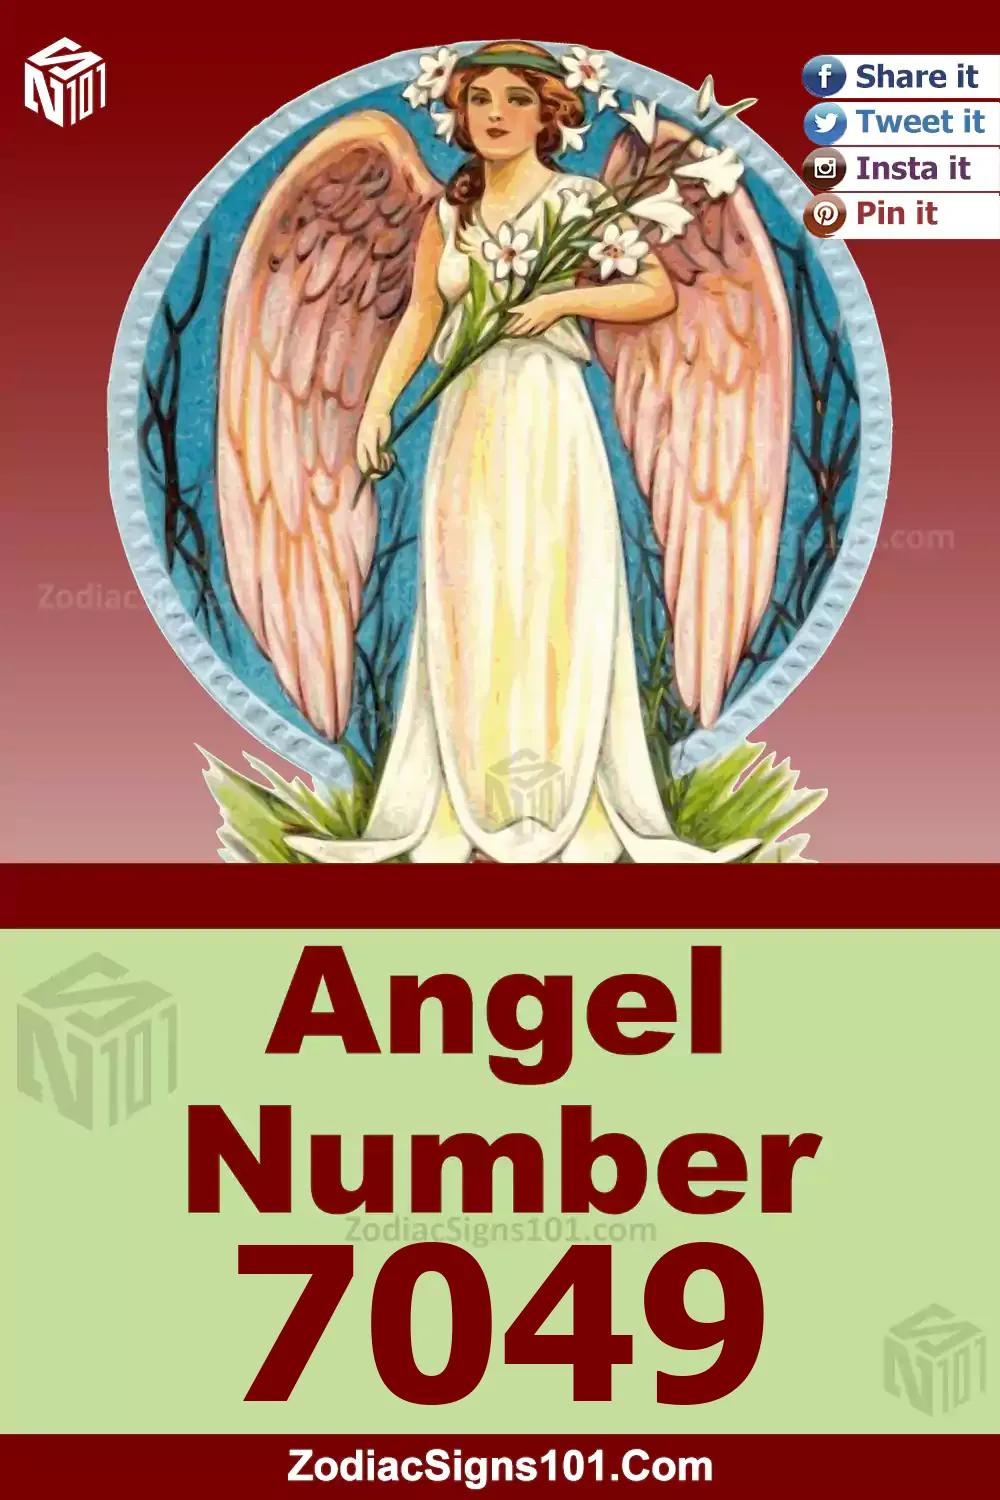 7049 Angel Number Meaning